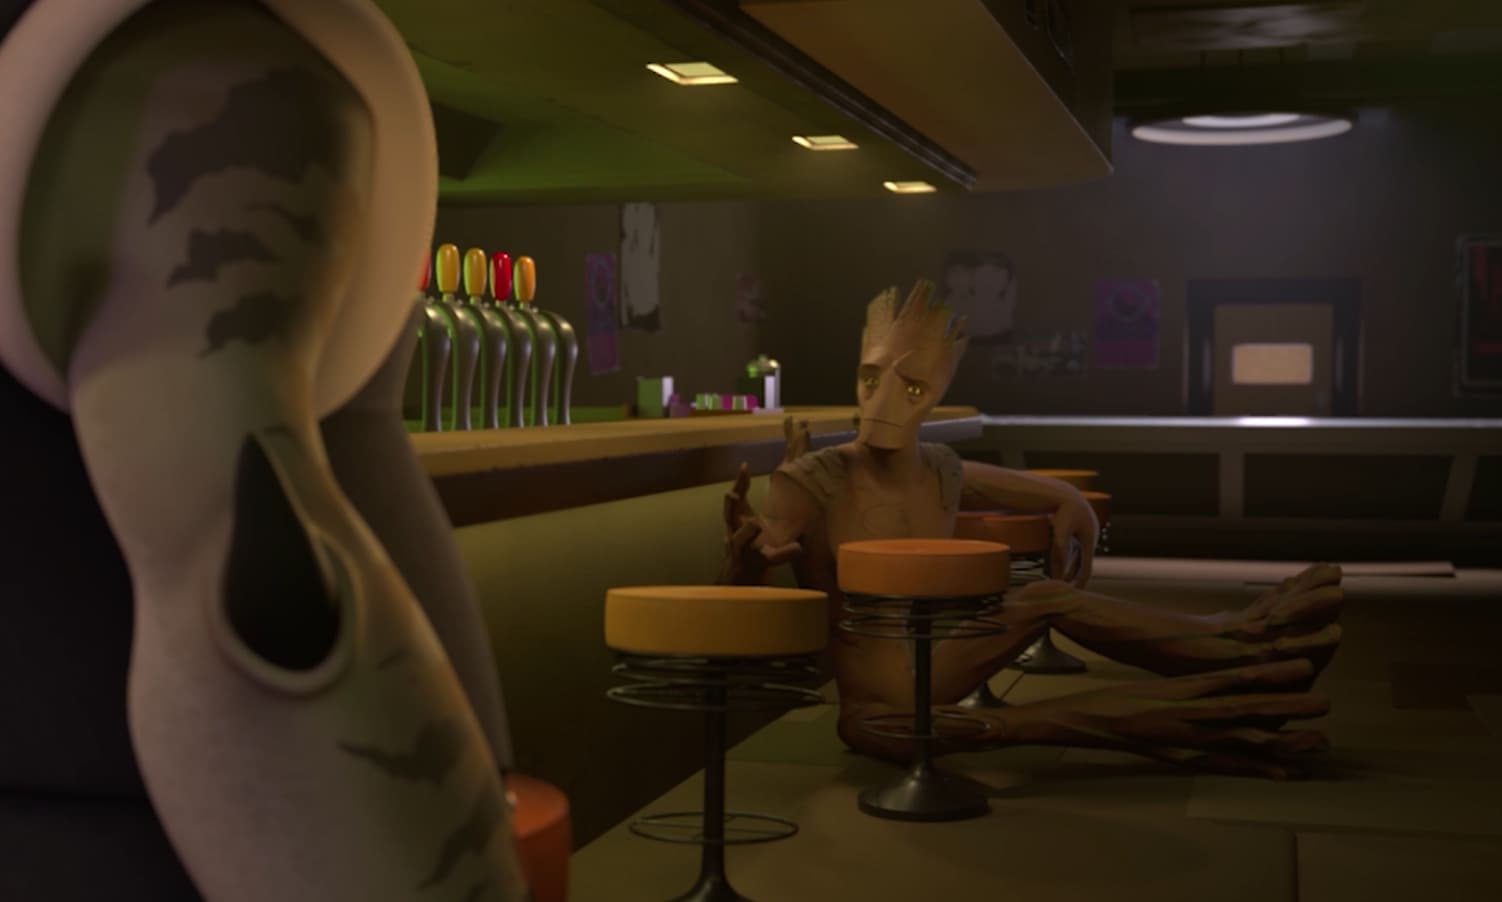 Scene from CG world in Guardians of the Galaxy